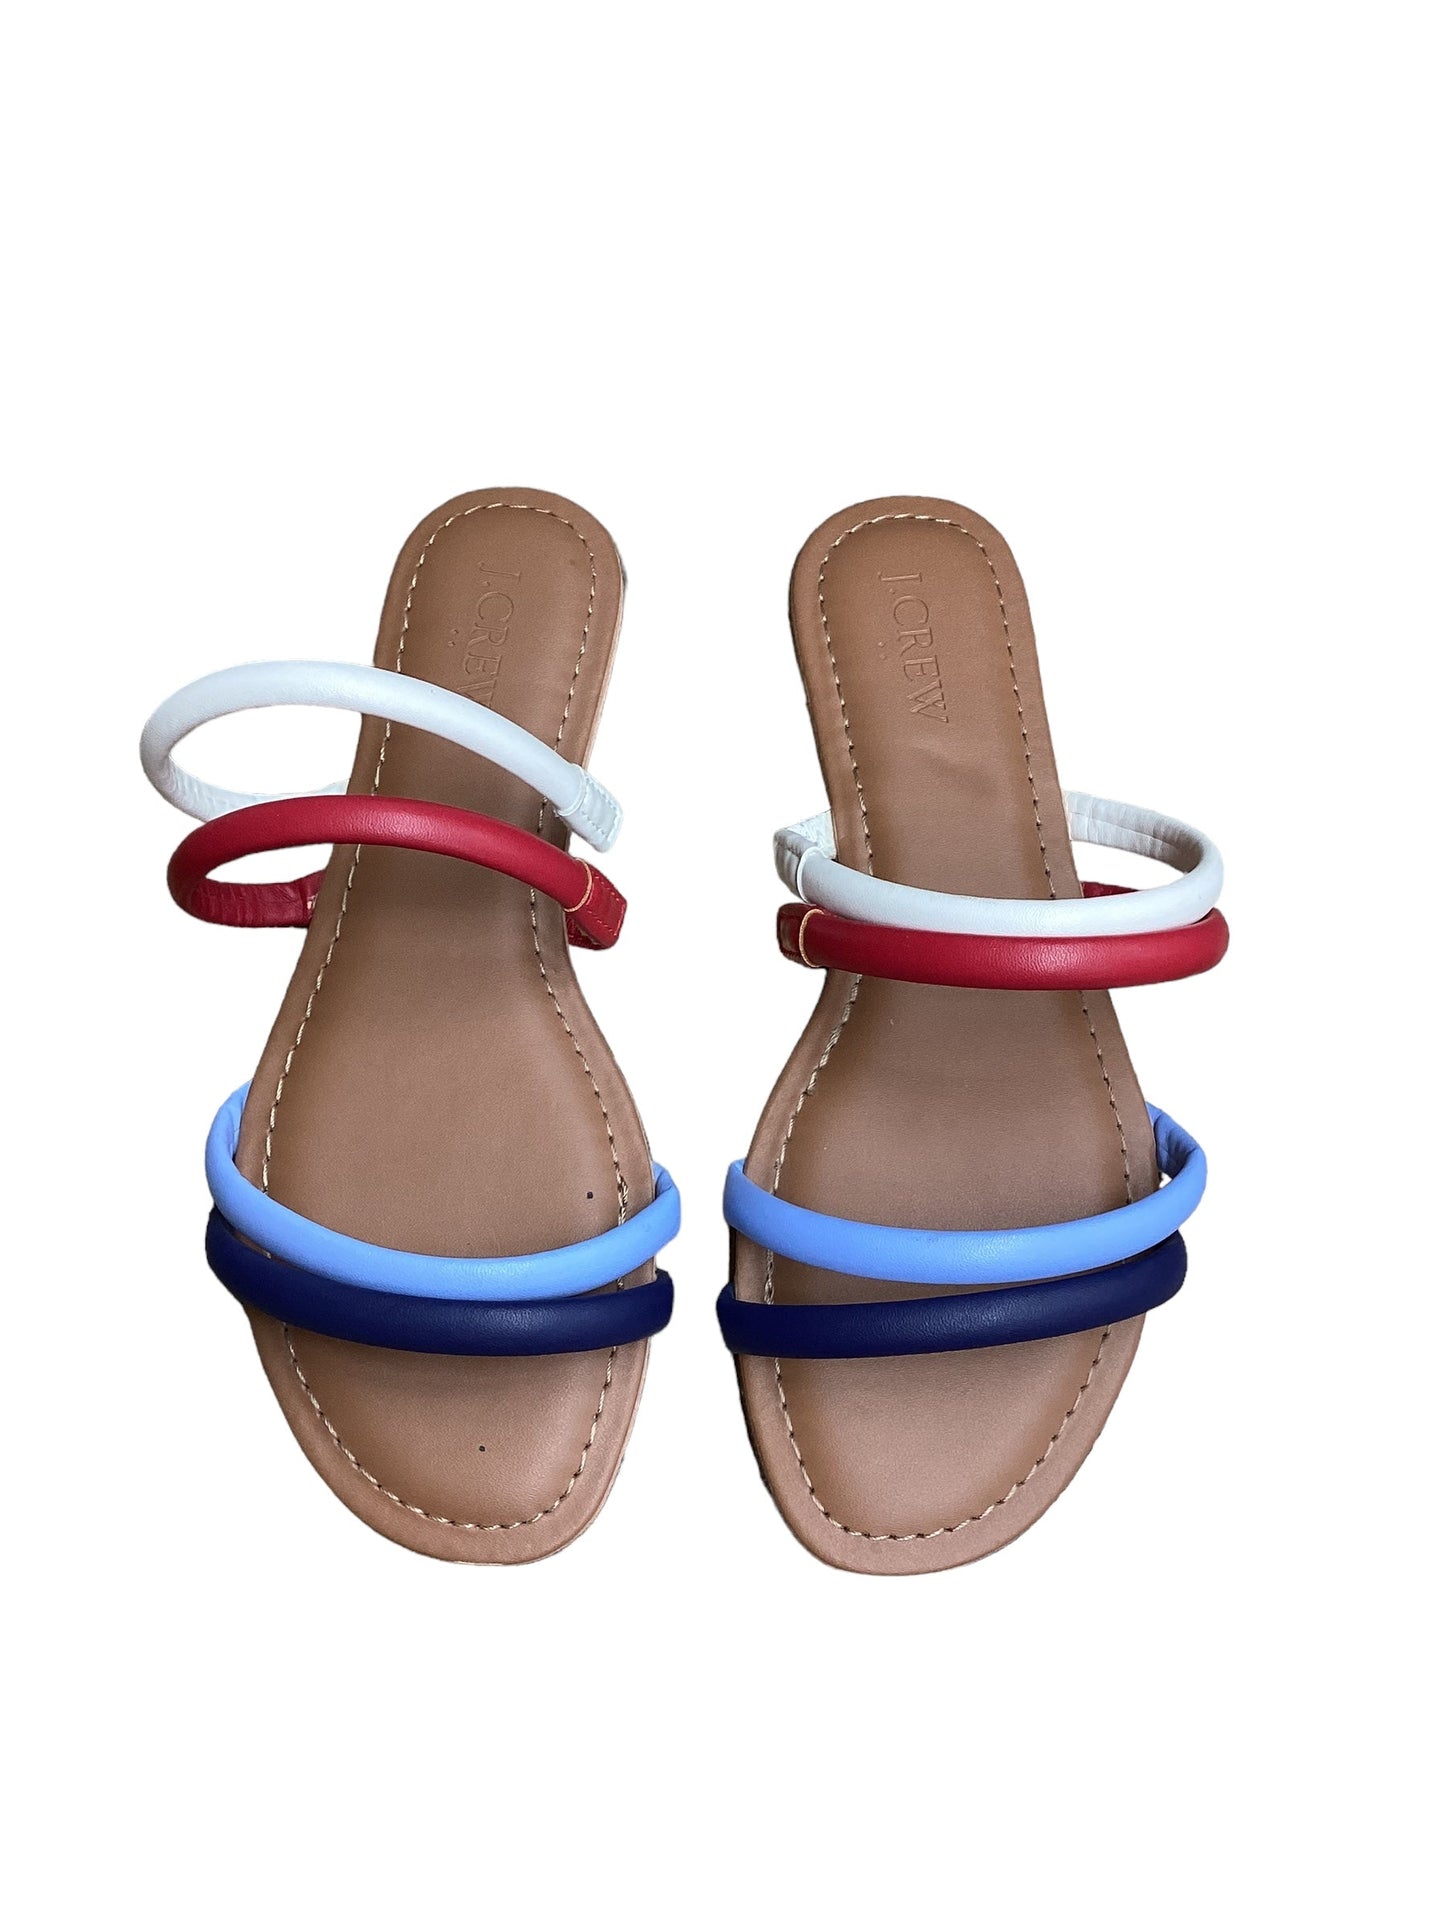 Blue & Red & White Sandals Flats J. Crew, Size 6